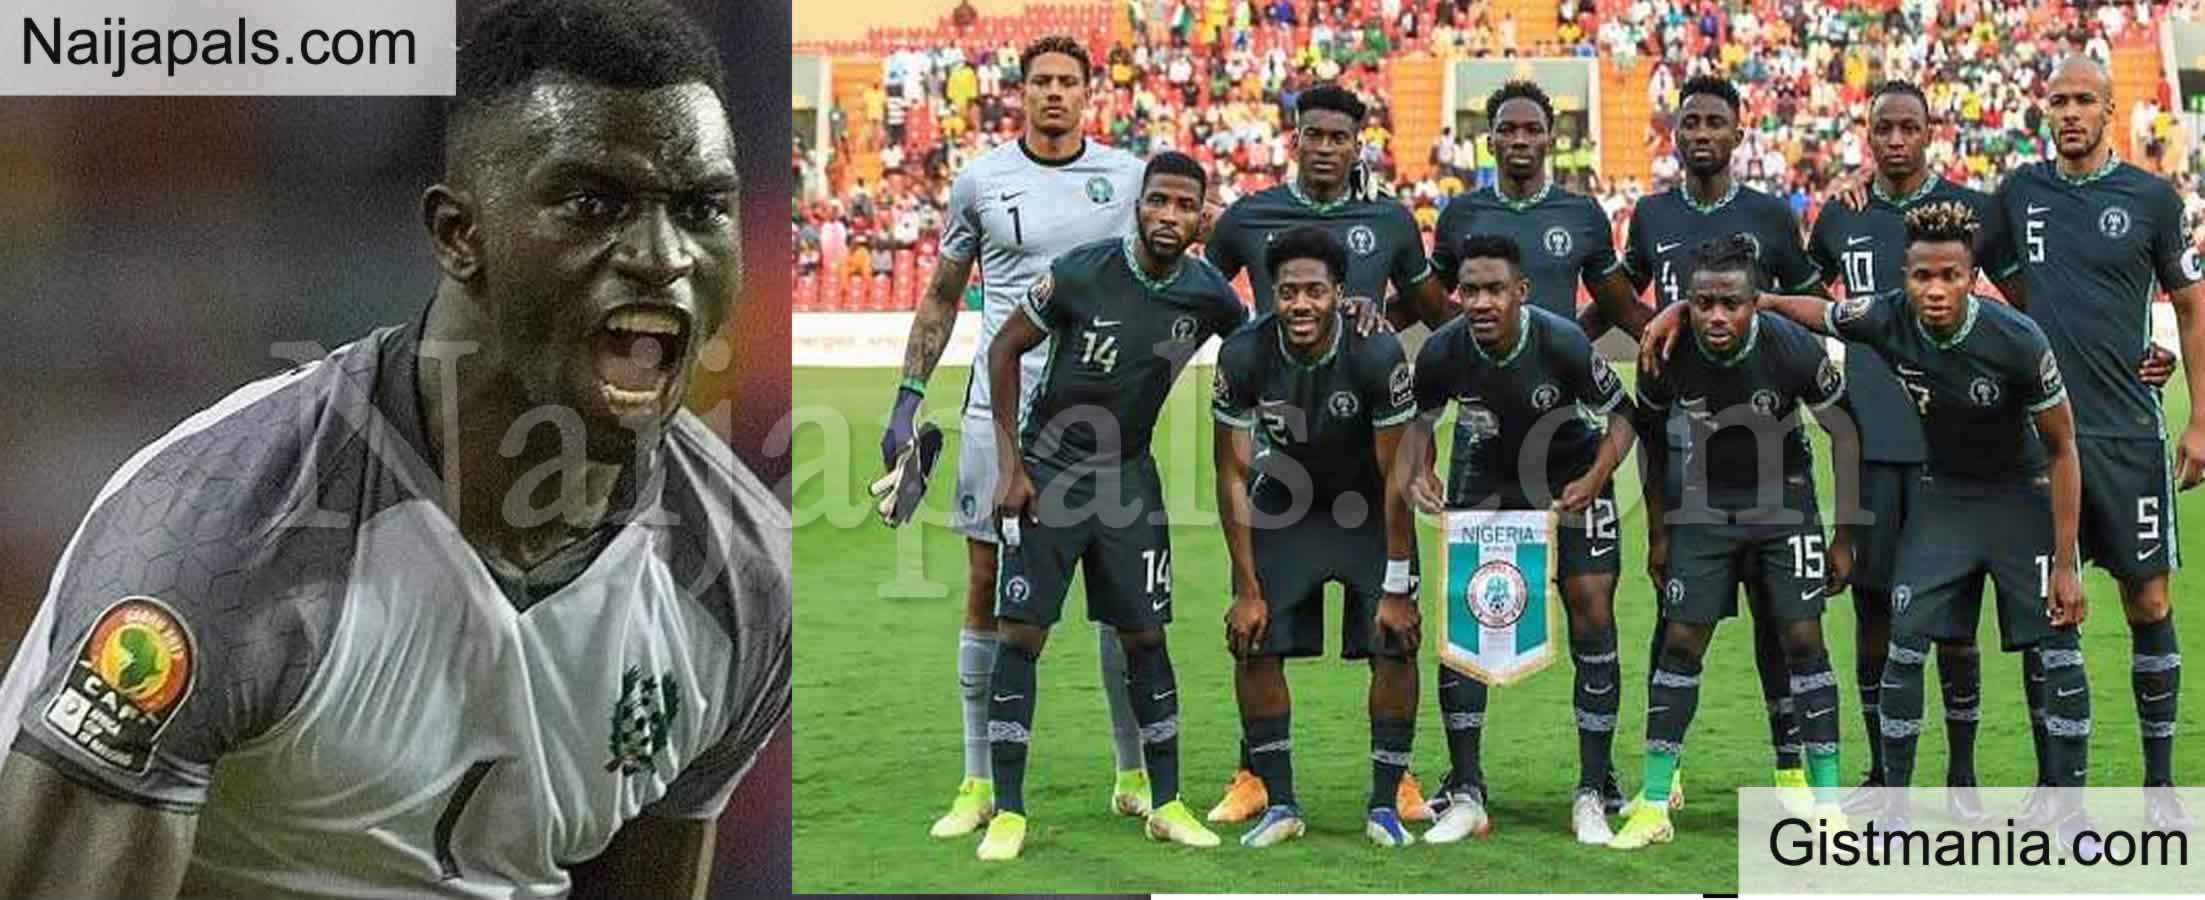 <img alt='.' class='lazyload' data-src='https://img.gistmania.com/emot/soccer.gif' /> <b>I'll Rather Die Than Lose To Super Eagles - Guinea Bissau Captain Vows As He Draws Battle Line</b>